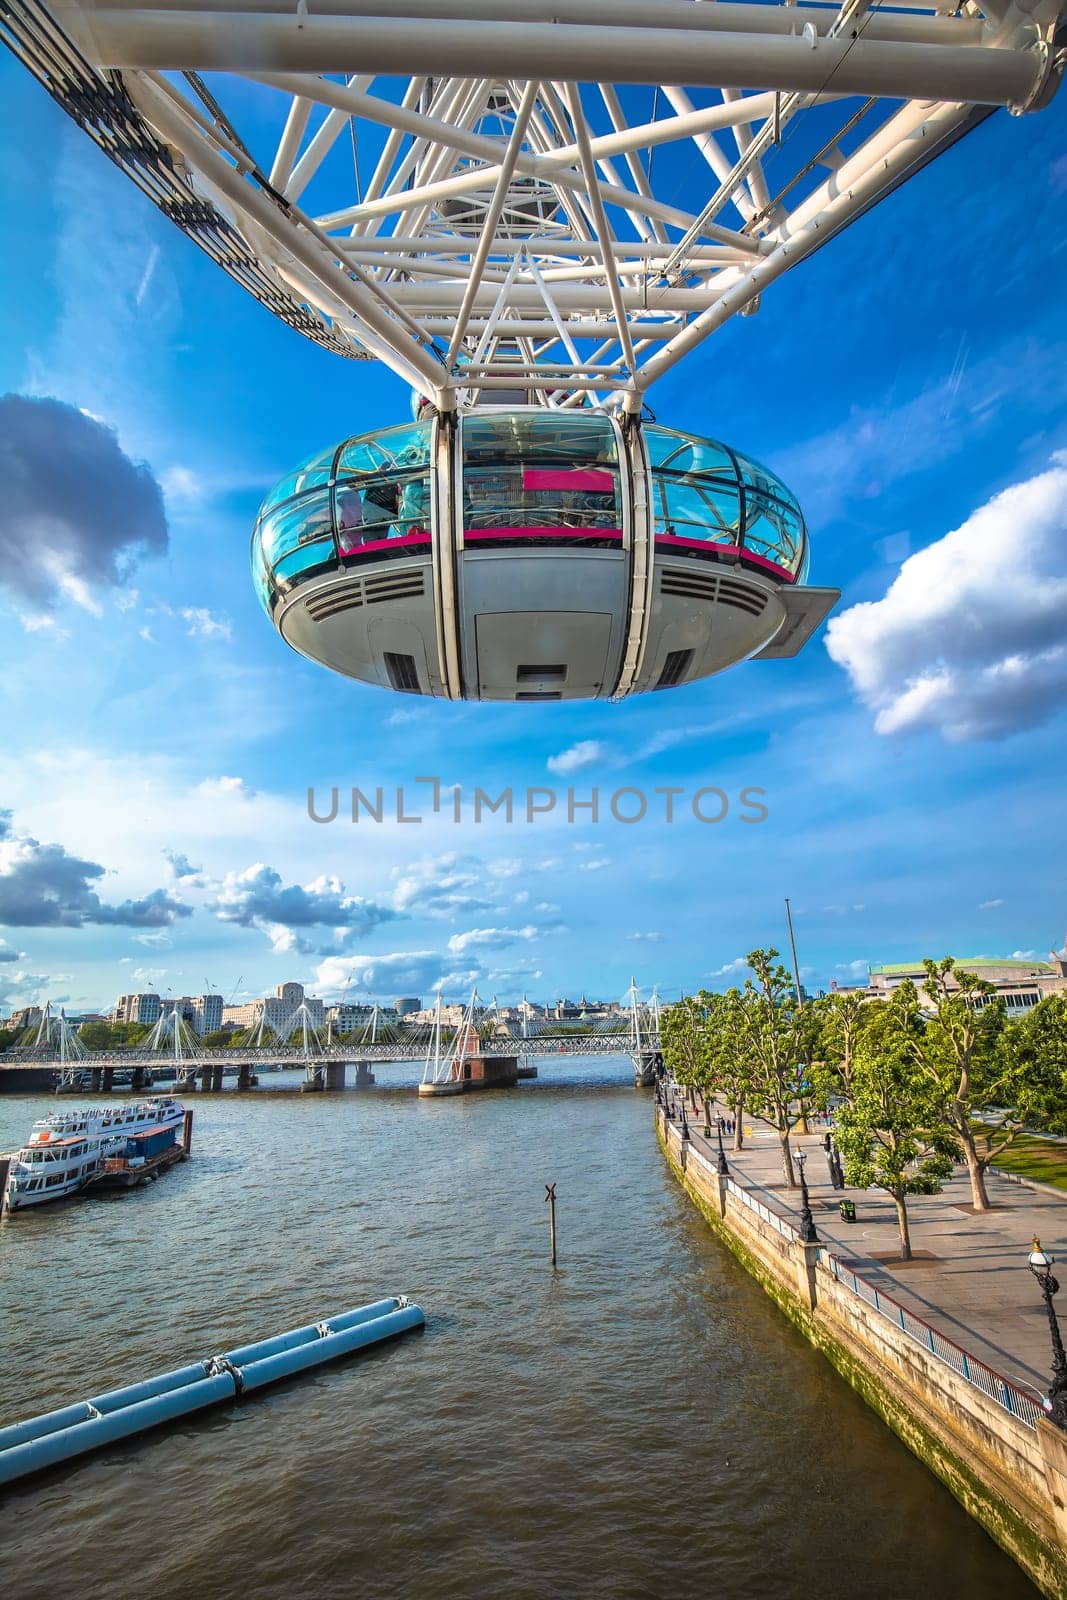 Scenic giant ferris wheel on Thames river in London view, capital of United Kingdom